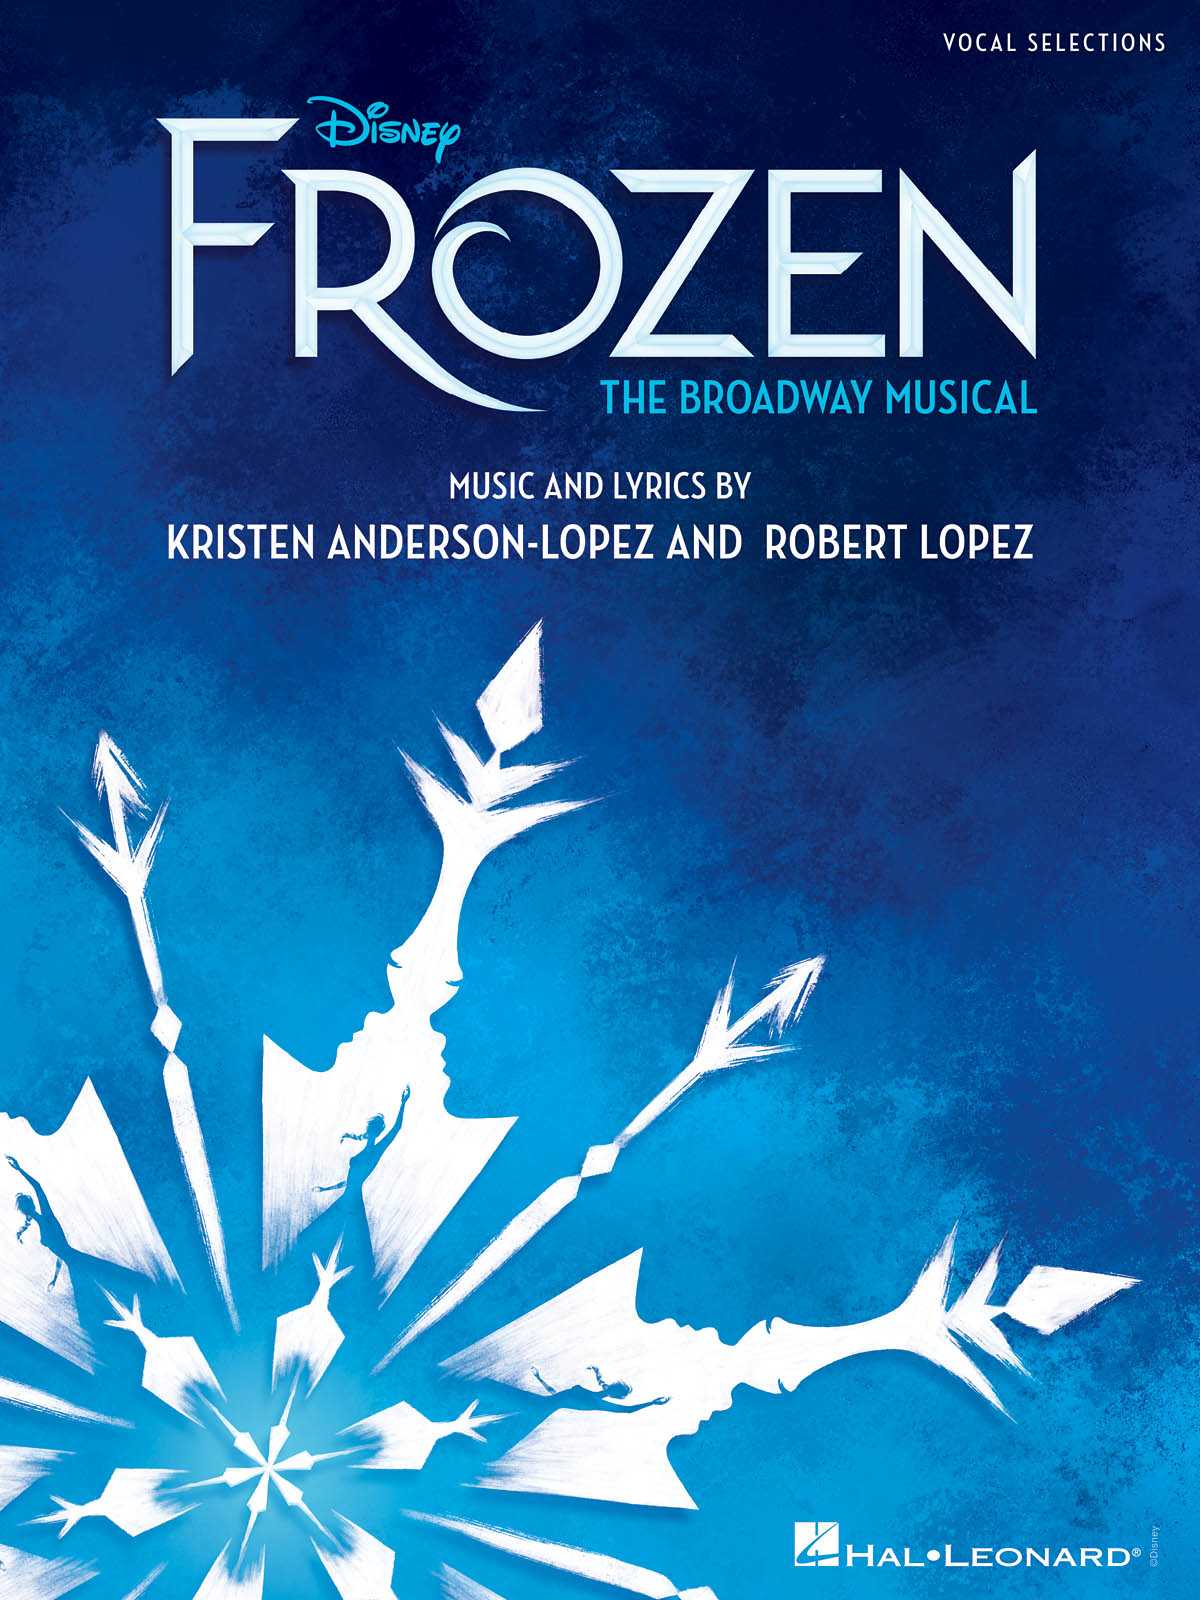 Frozen Vocal Selections - the Broadway Musical